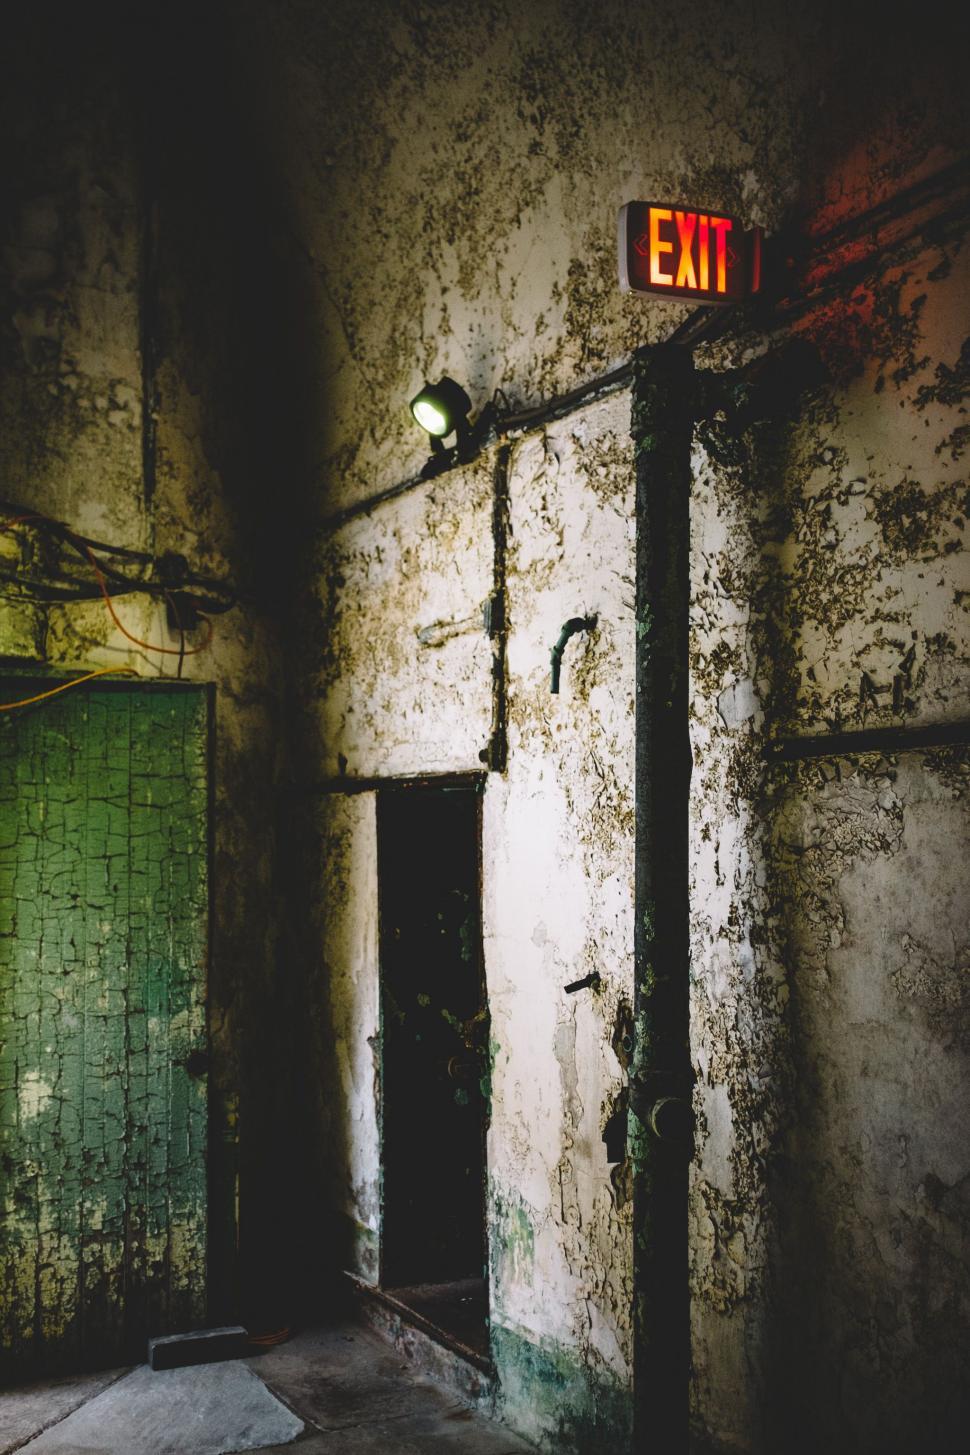 Free Image of Abandoned Building with exit board  